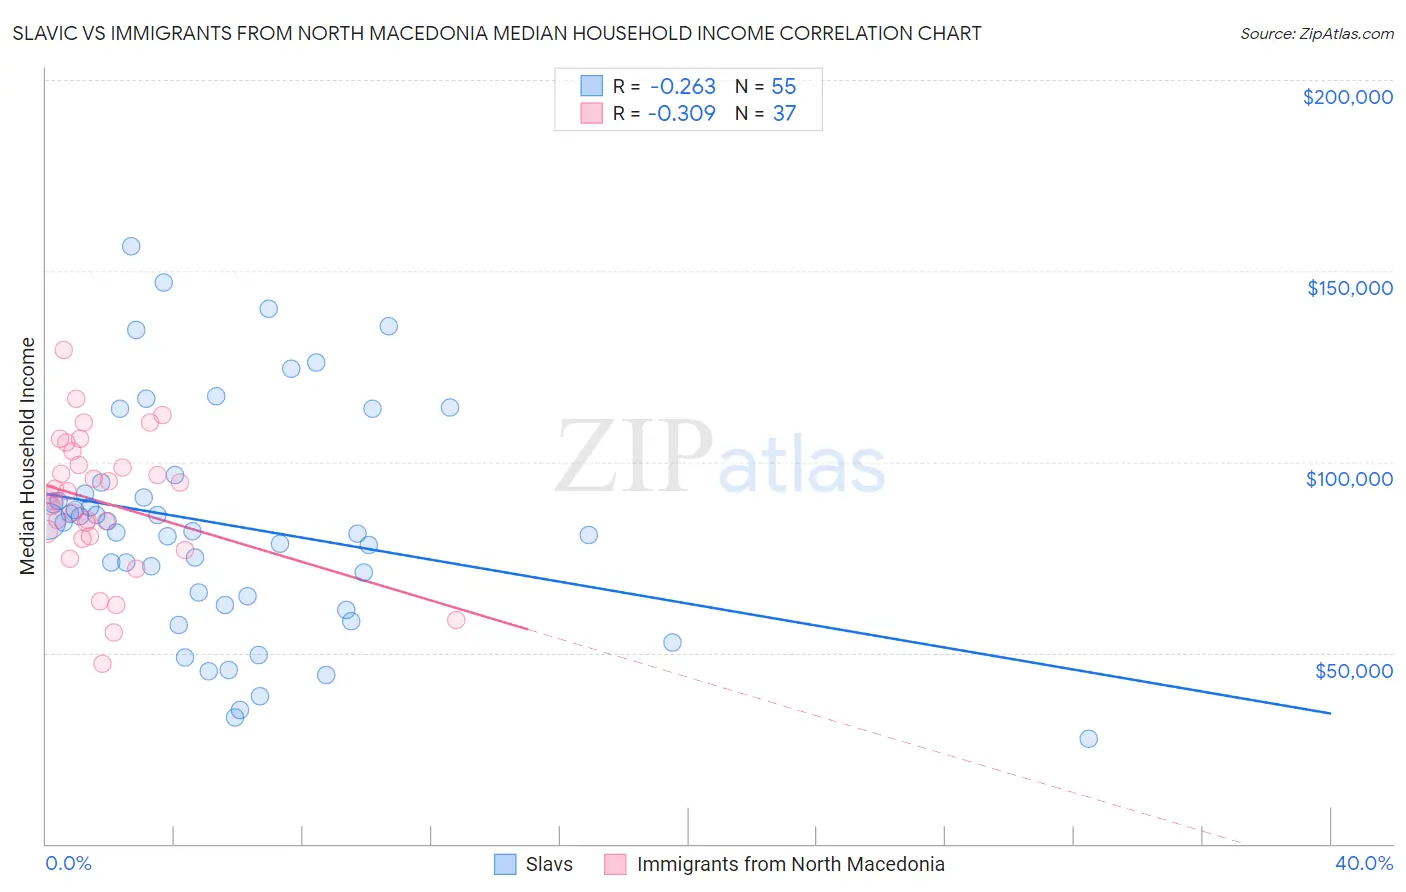 Slavic vs Immigrants from North Macedonia Median Household Income